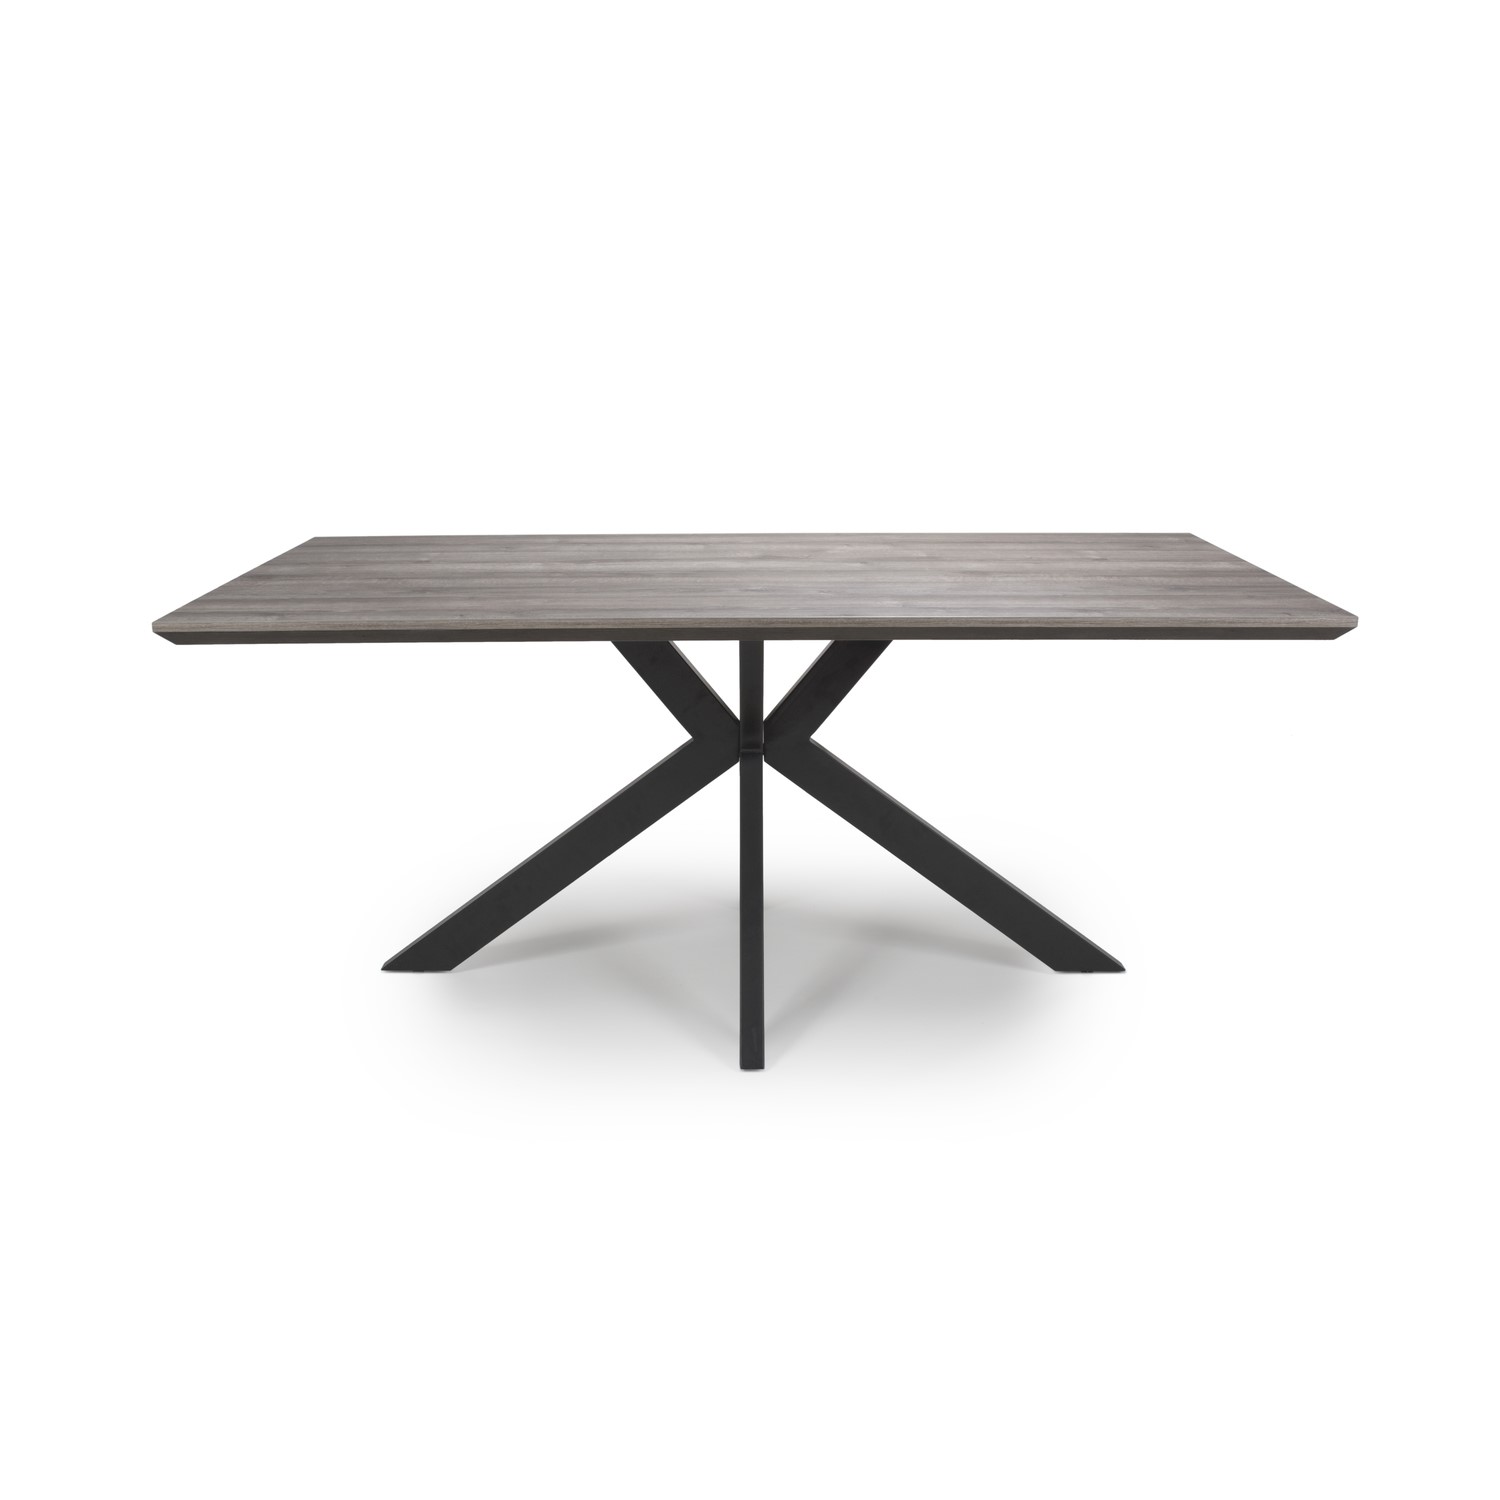 Read more about Large rectangle grey wood dining table seats 8 liberty